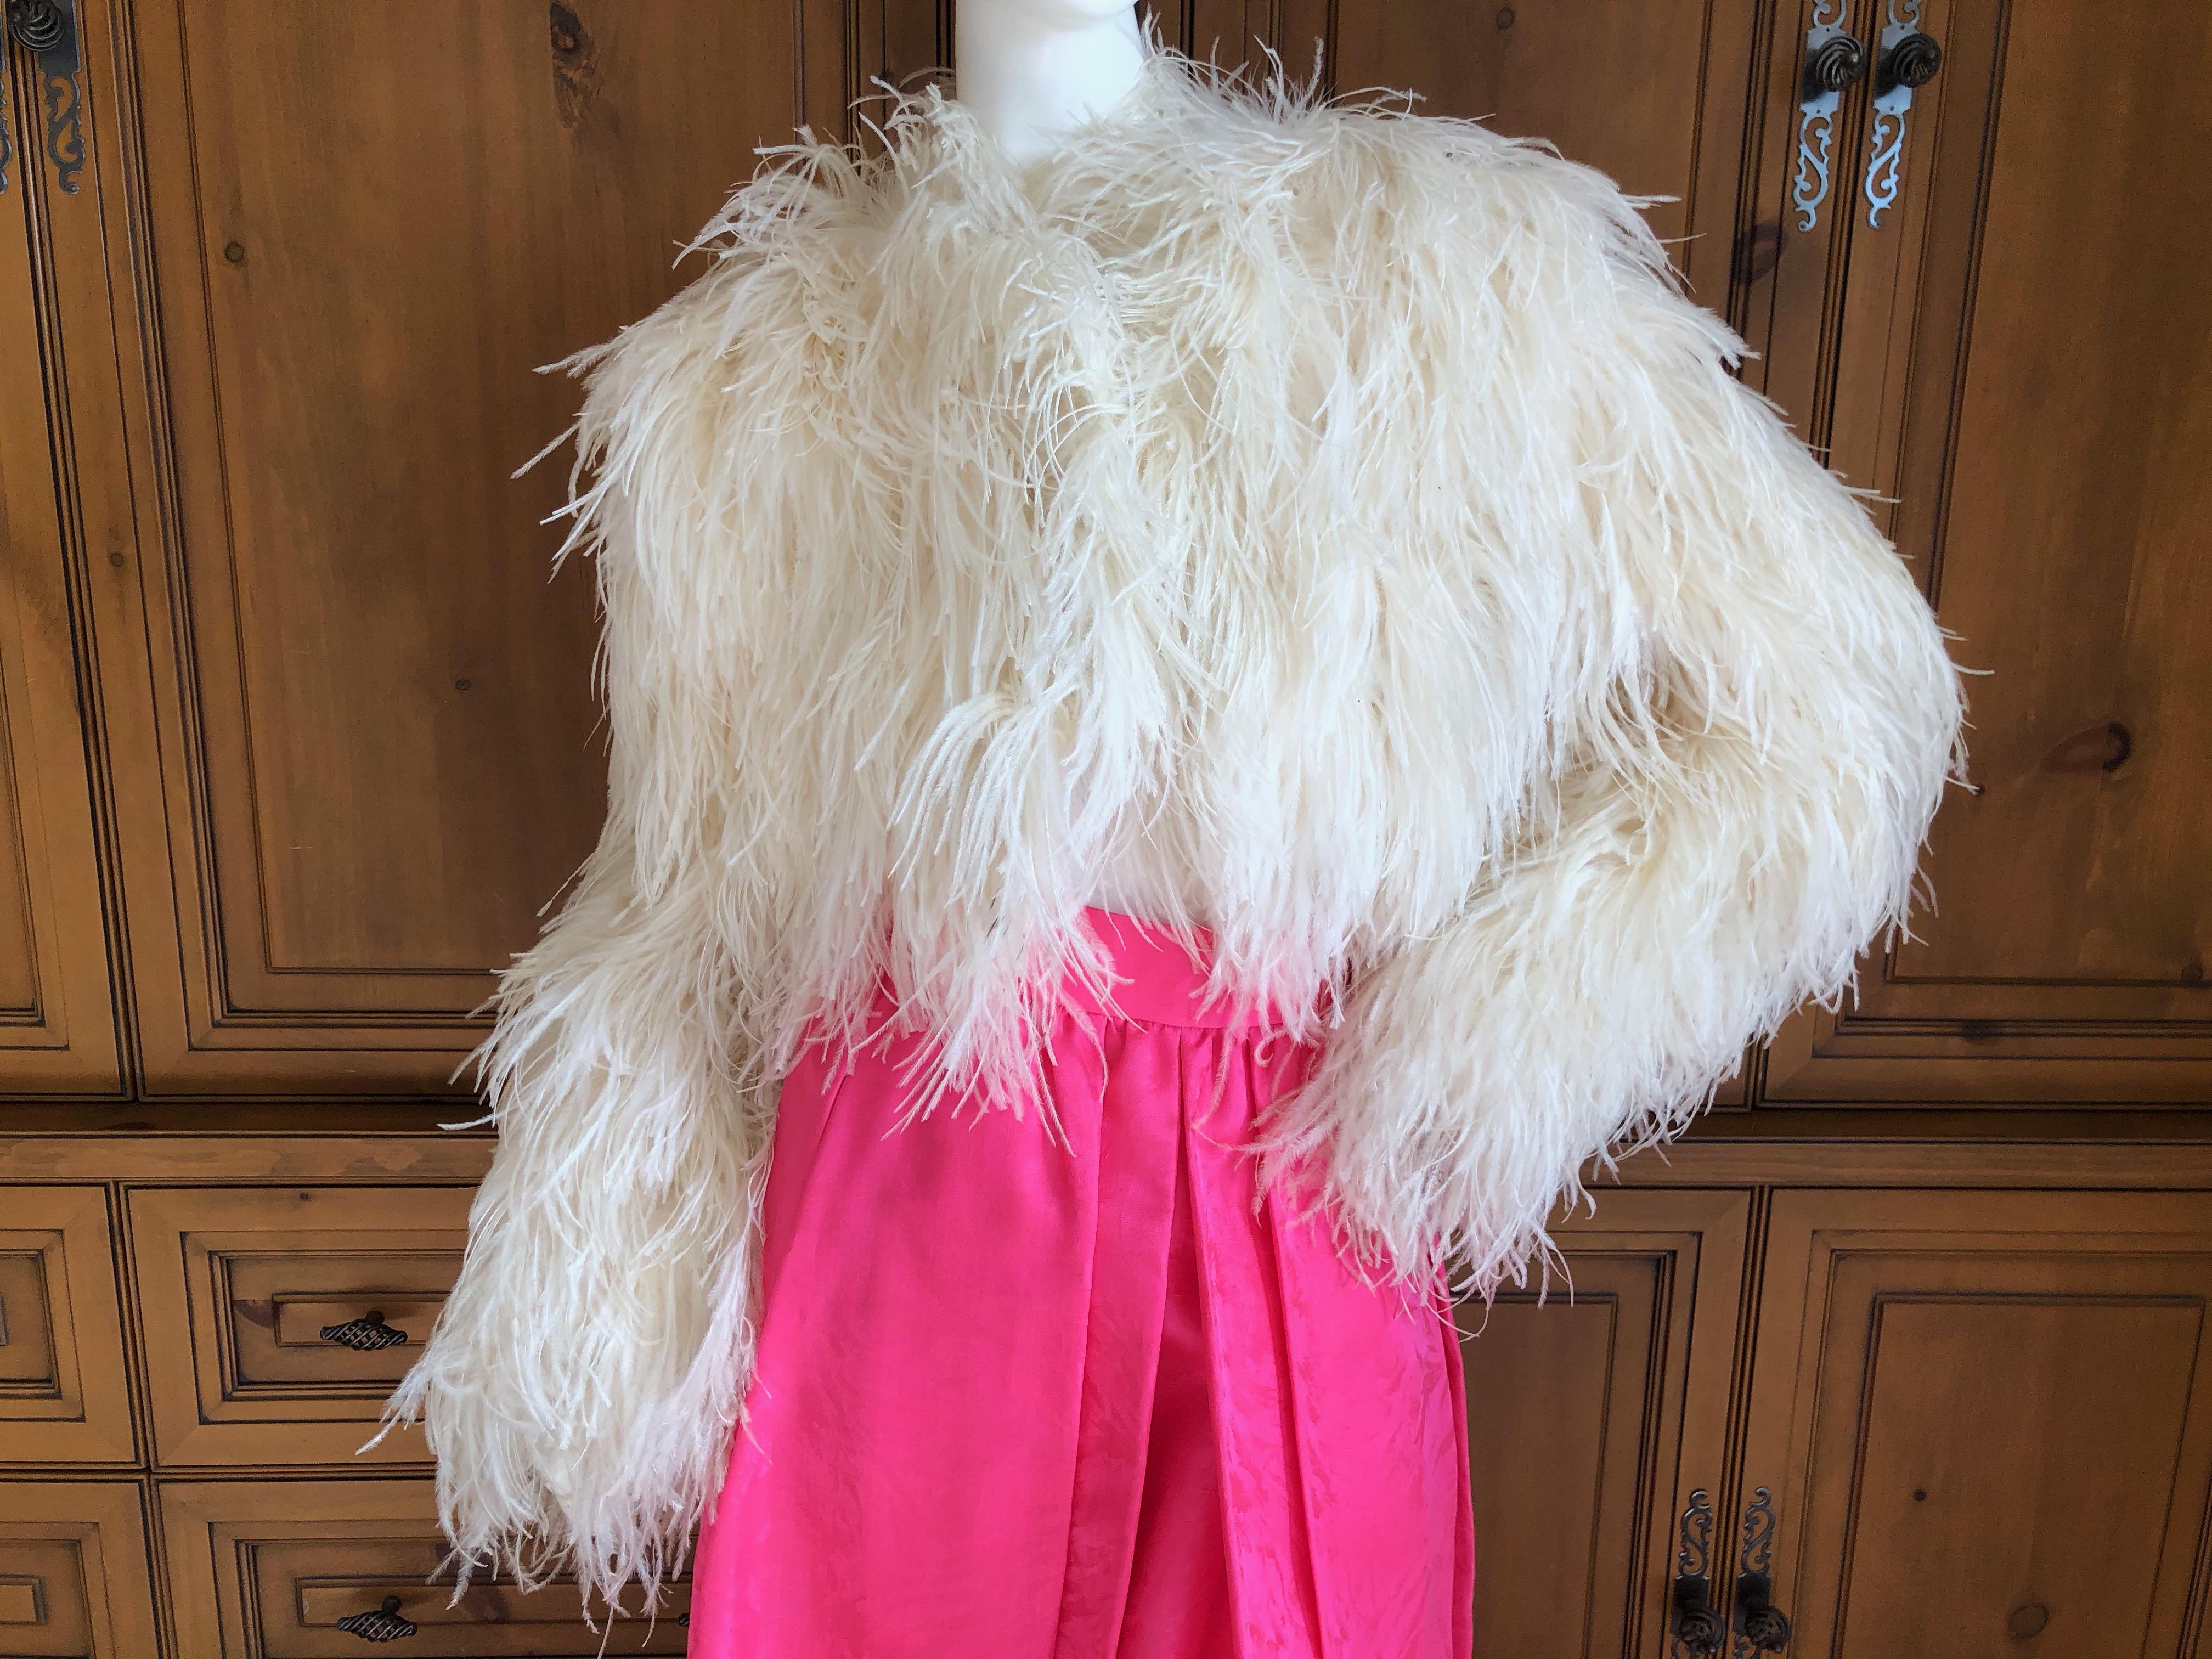 Christian Dior by John Galliano Maison Lemarie Ostrich Plume Silk Jacket.
Sensational white silk jacket embellished with ostrich plumes by Maison Lemarie for Christian Dior.
Closes with two heavy hooks similar to a fur coat or jacket
Size 40
Bust